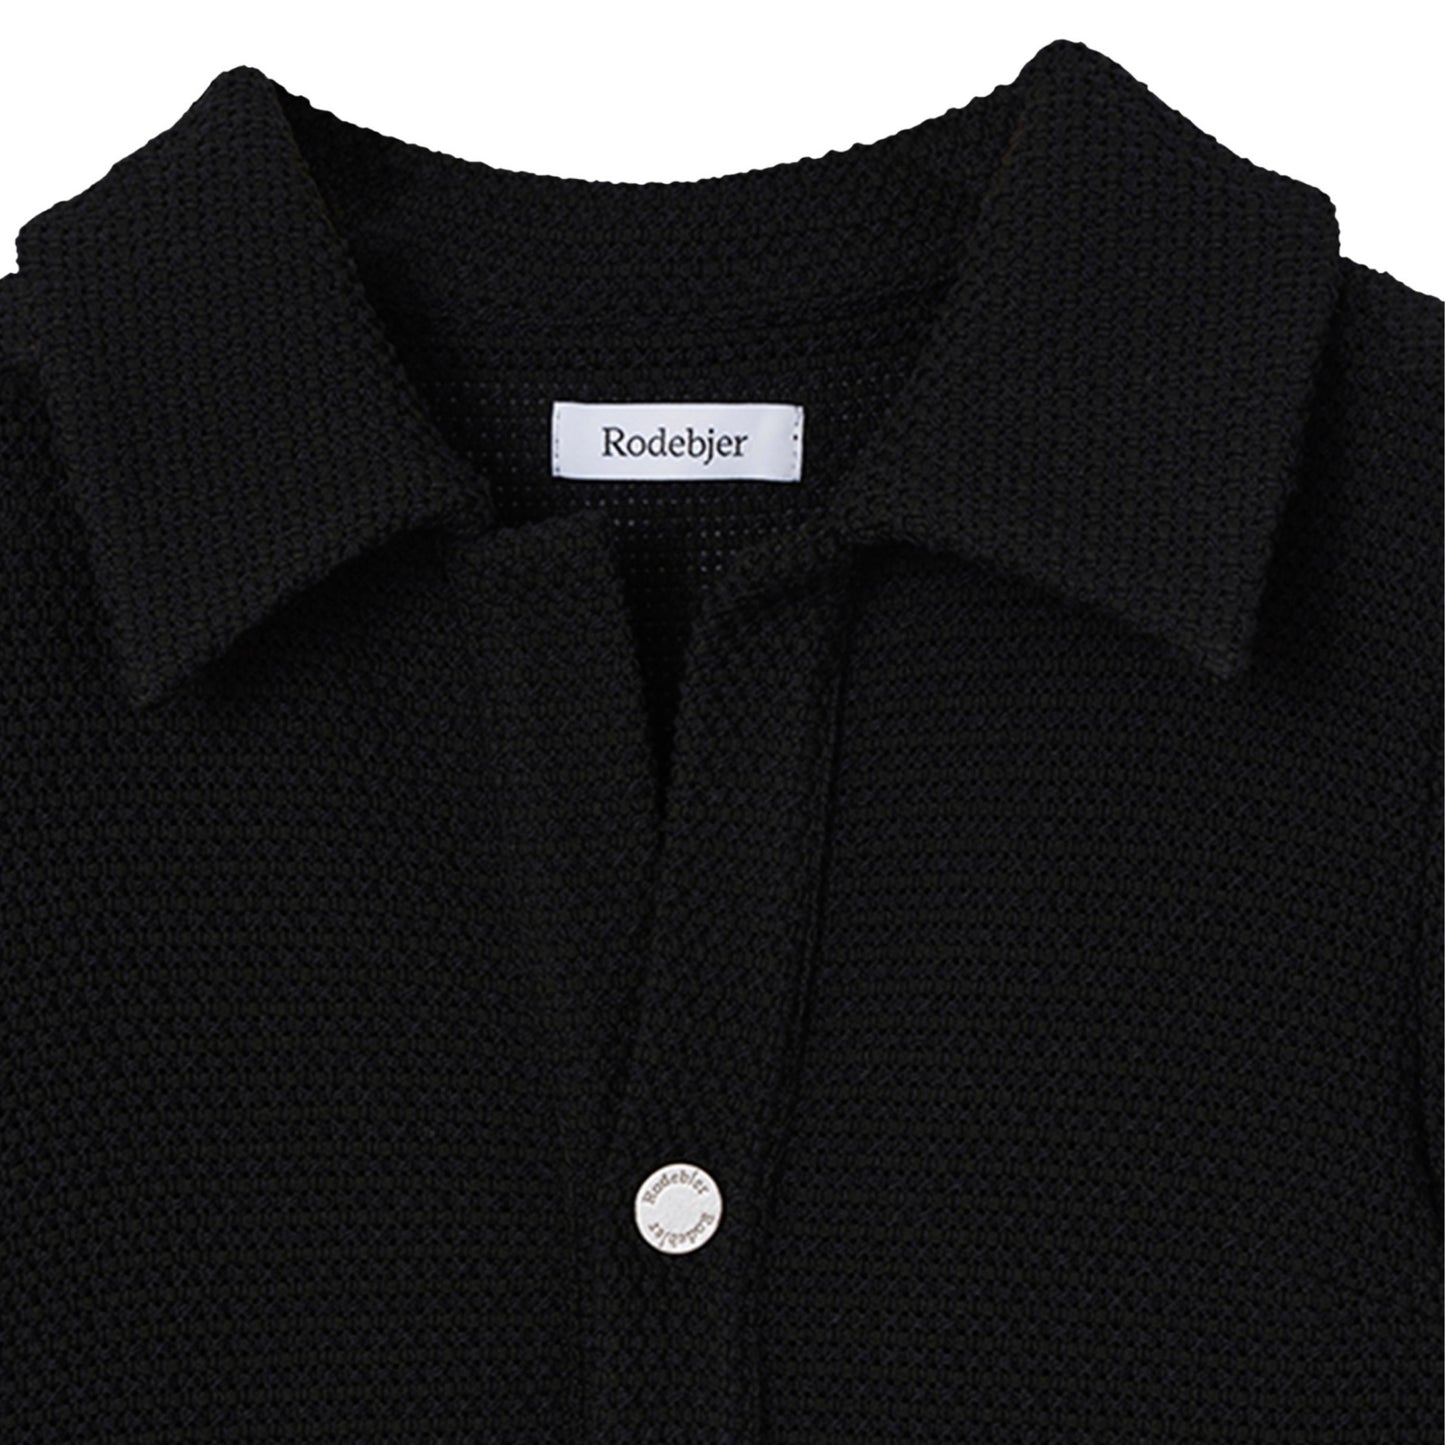 Rodebjer Knit Polo